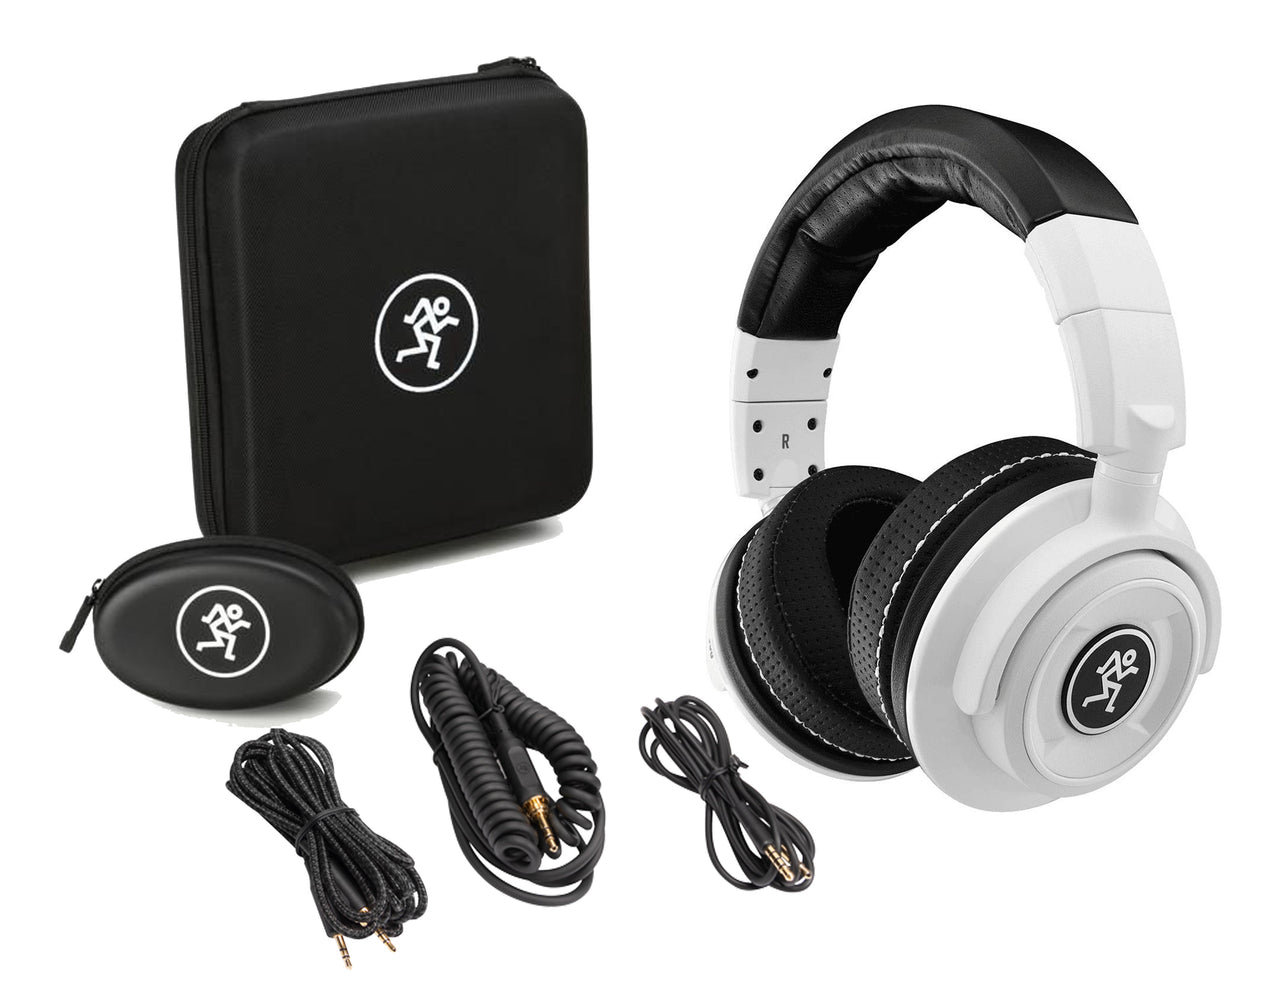 Mackie MC-350 Professional Closed-back Headphones - Limited-edition White